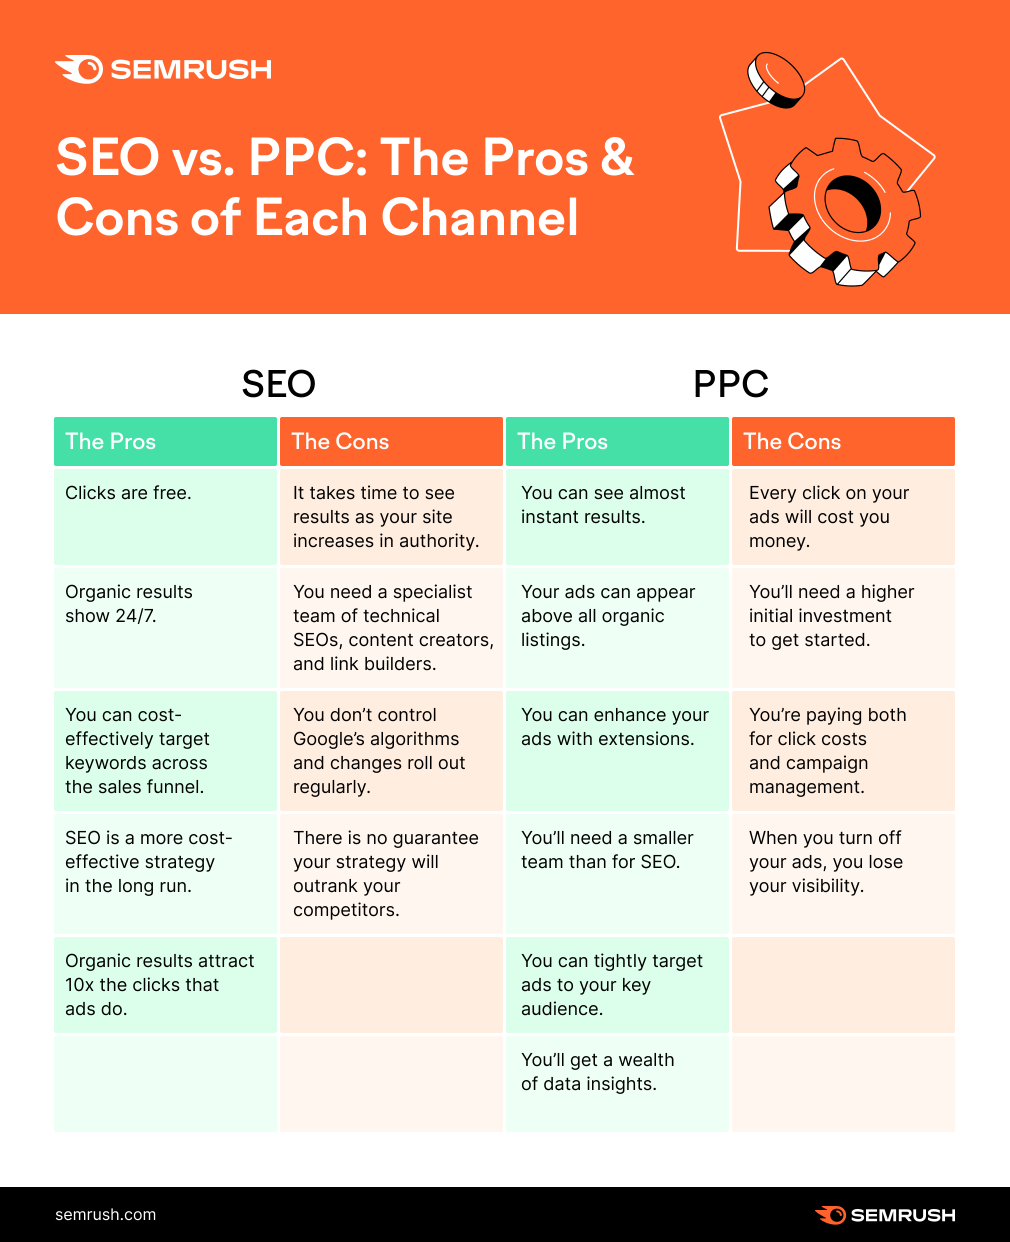 an infographic by Semrush comparing "SEO vs. PPC: The Pros & Cons of Each Channel"